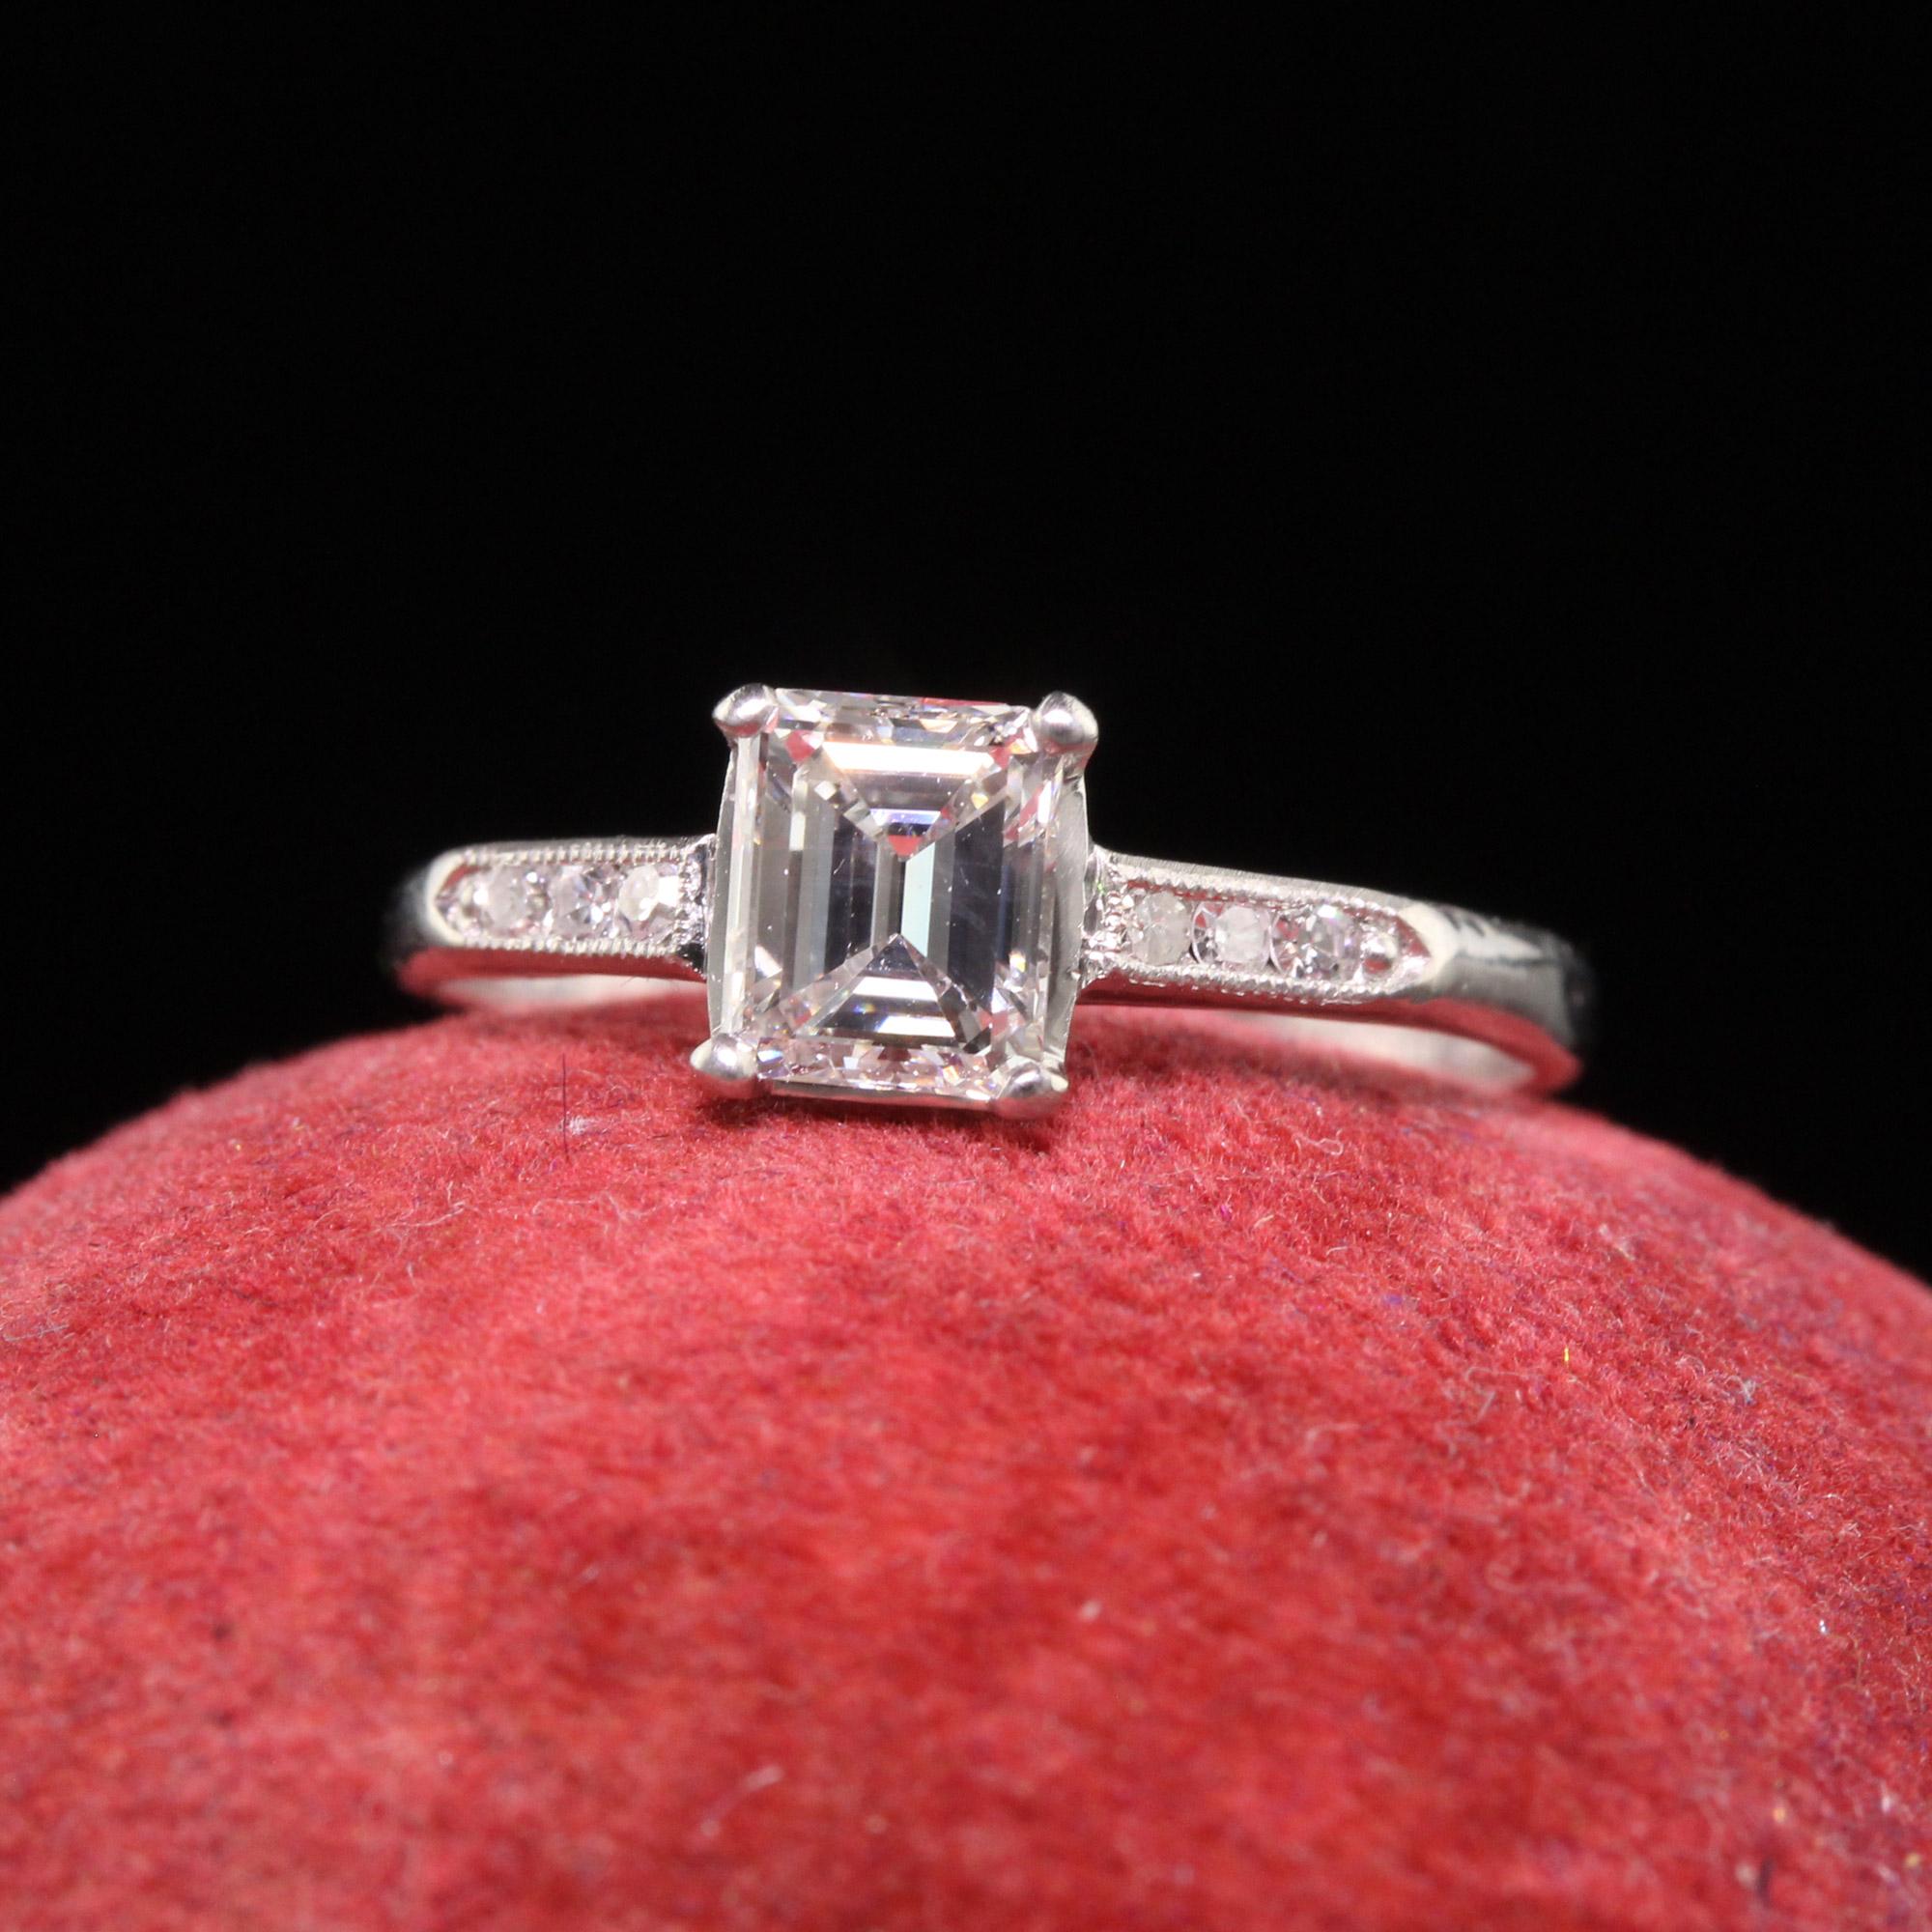 Antique Art Deco Platinum Emerald Cut Diamond Classic Engagement Ring, GIA In Good Condition For Sale In Great Neck, NY